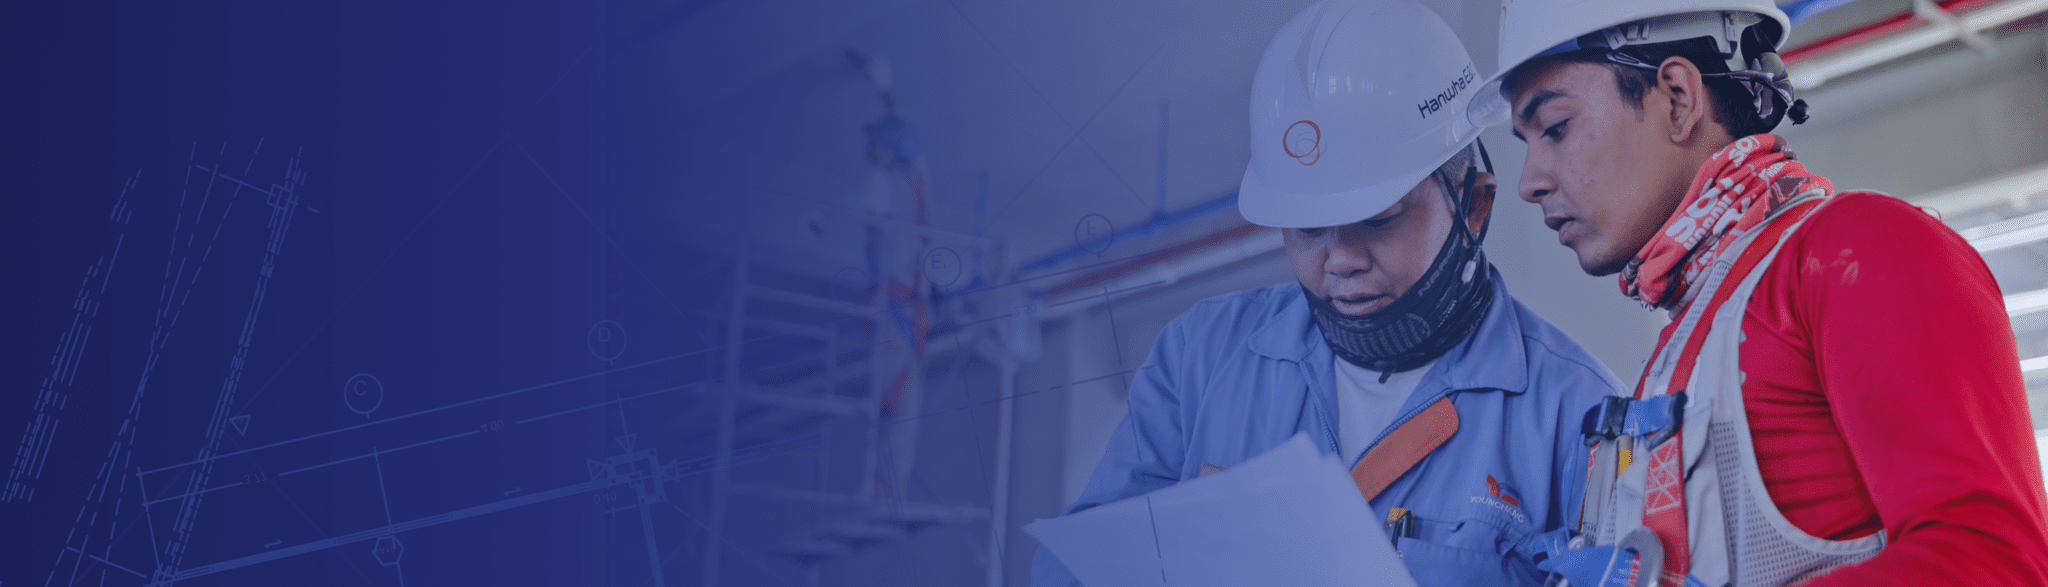 Construction workers organizational compliance protocol